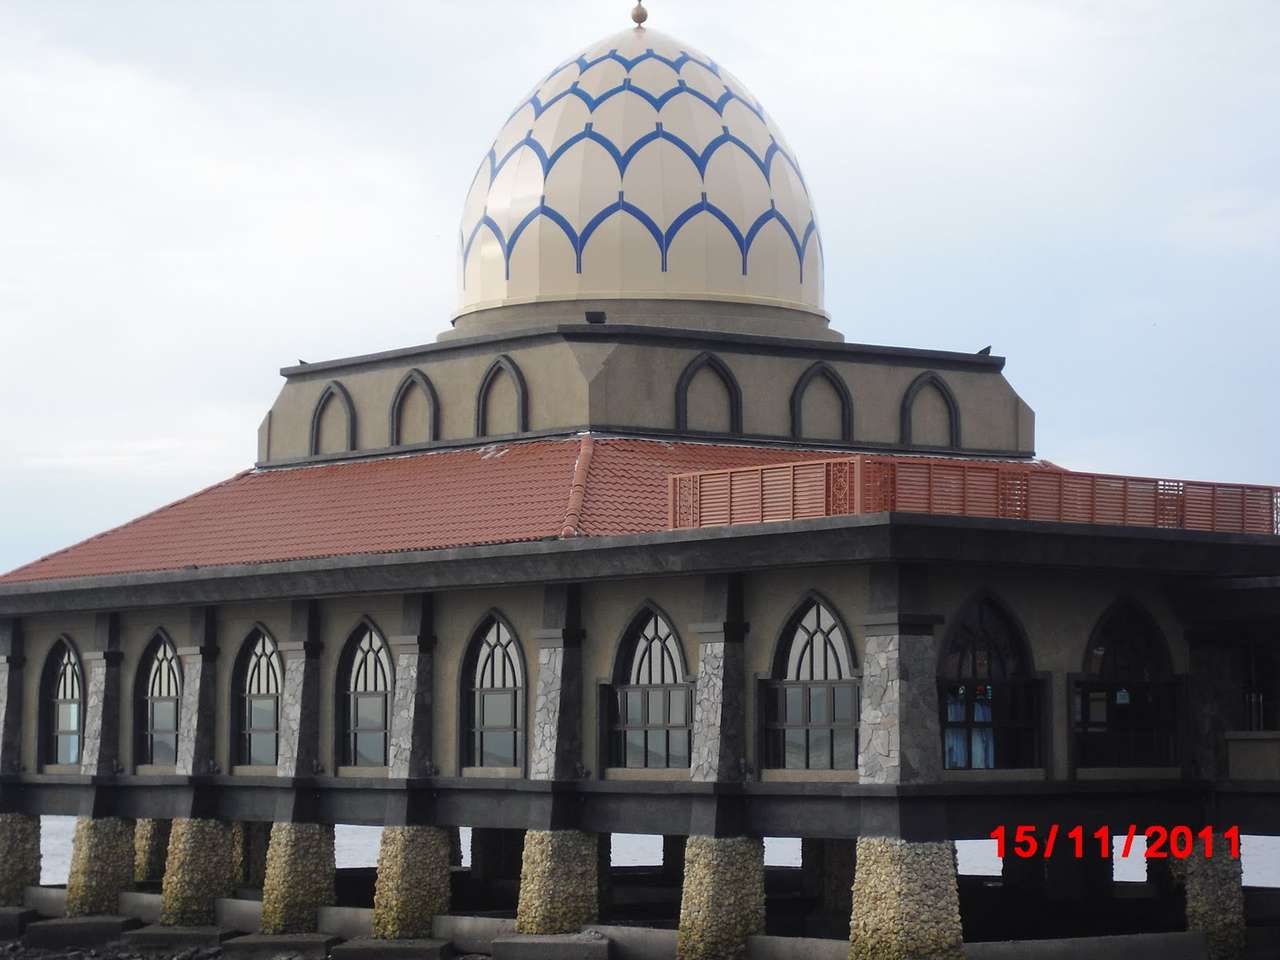 MASJID DI PERLIS puzzle online from photo